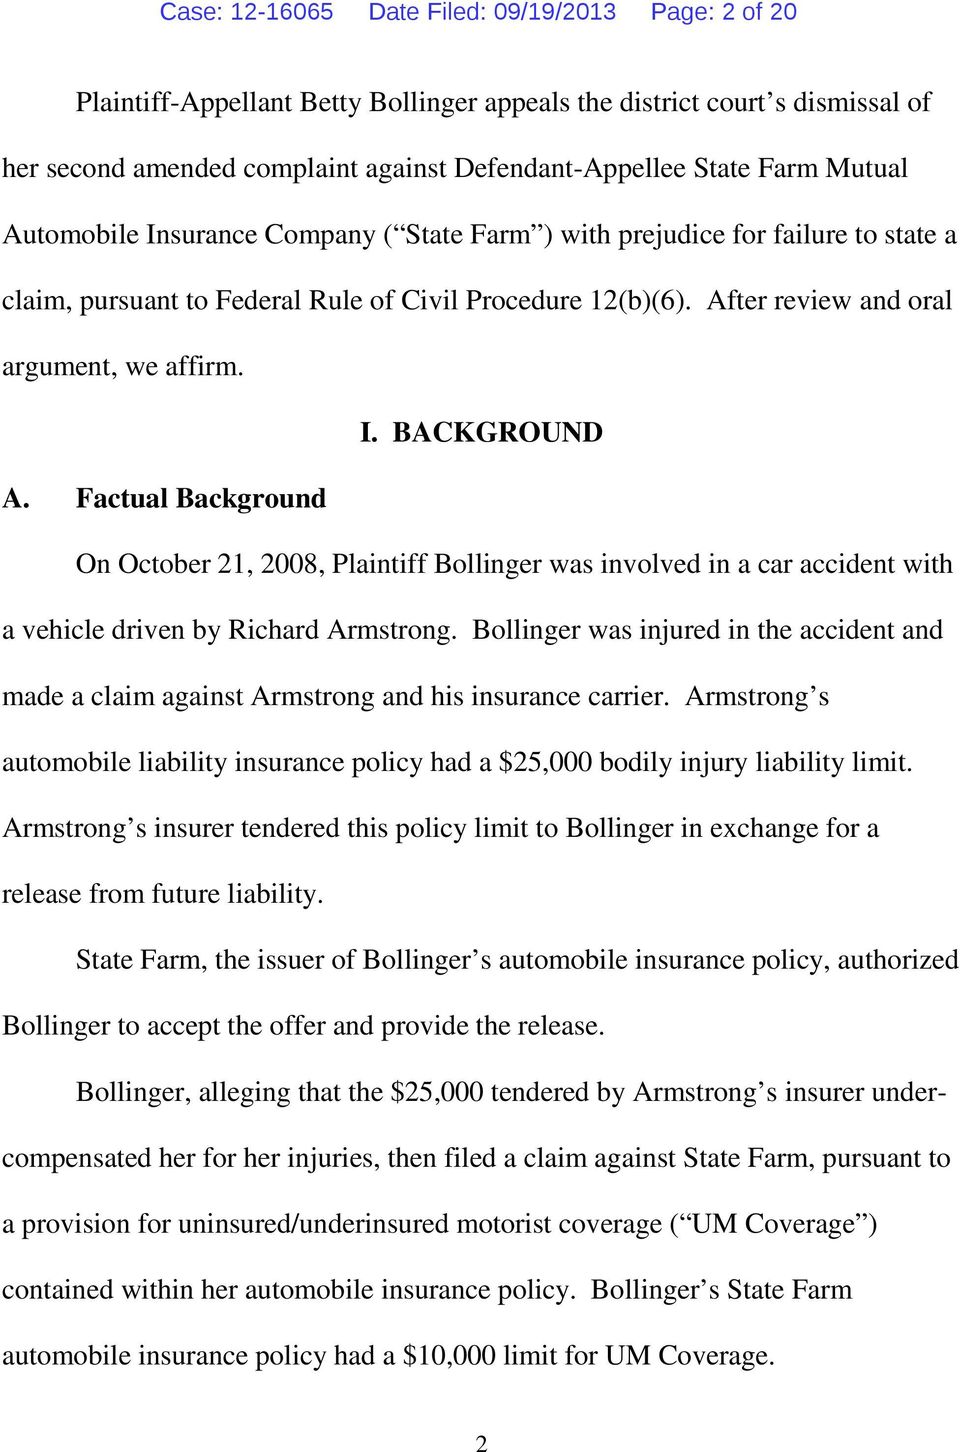 Factual Background On October 21, 2008, Plaintiff Bollinger was involved in a car accident with a vehicle driven by Richard Armstrong.